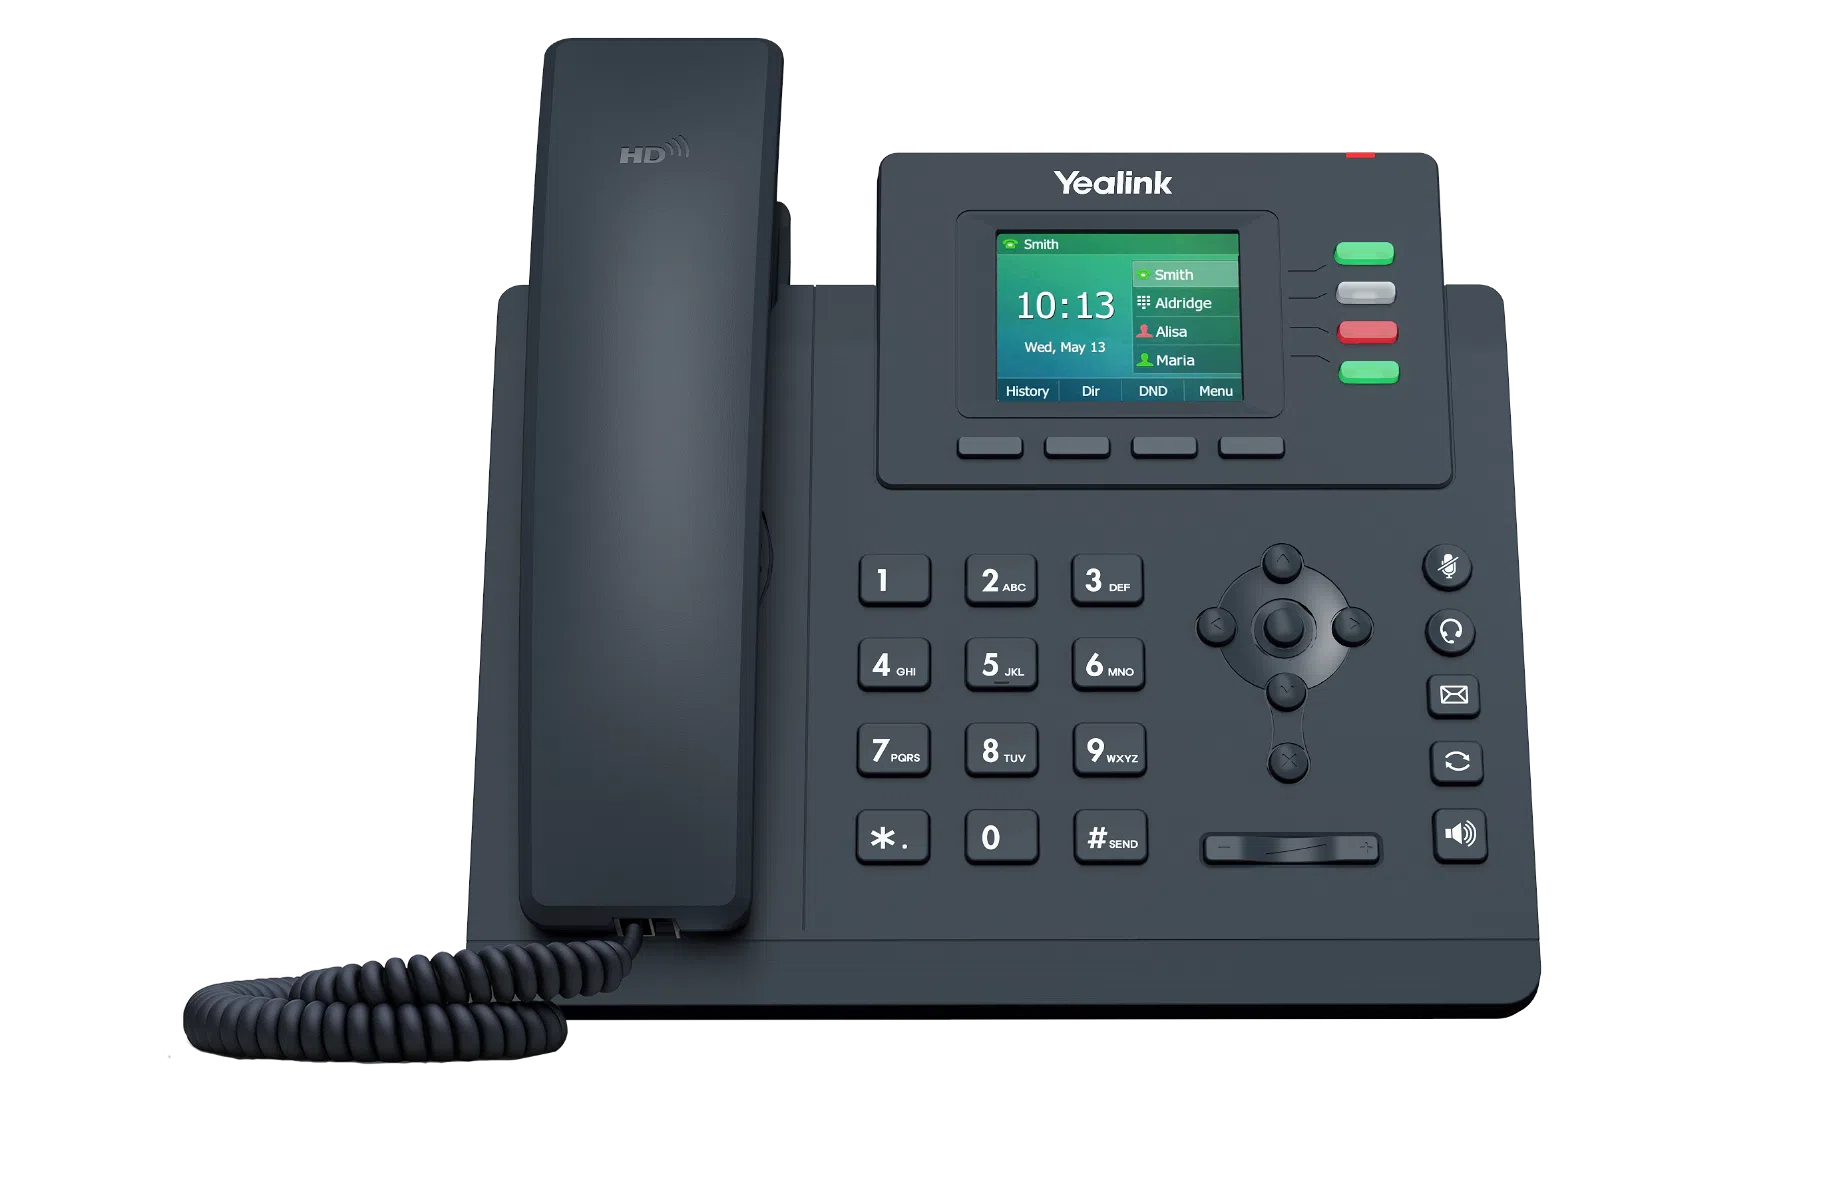 Can you provide the SKU for the product 'Yealink T33G Entry Level Gigabit PoE Color IP Phone 1301046'?